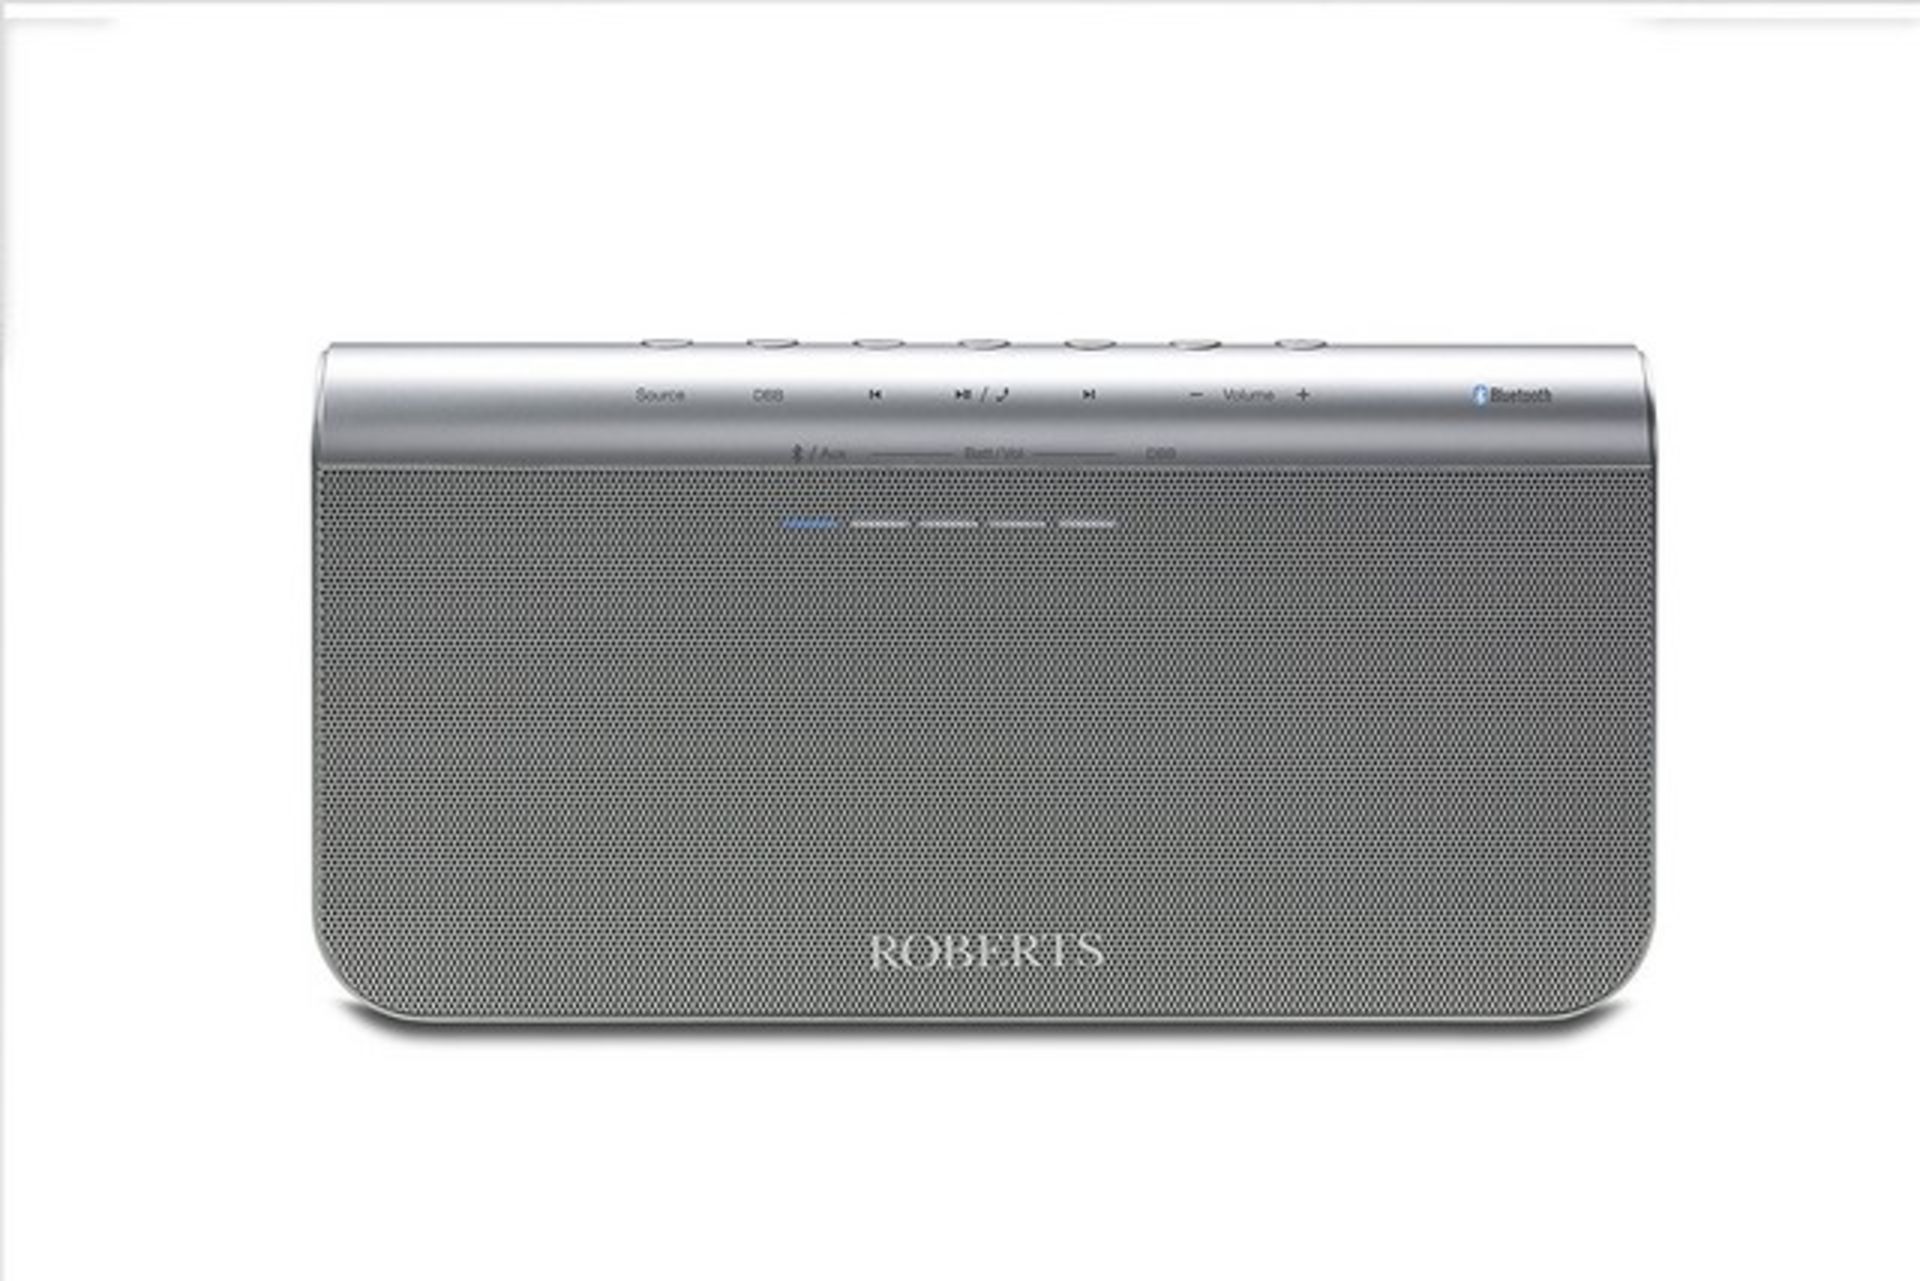 V Brand New Roberts BluPad Radio Portable Speaker With Built In Rechargable Battery And Leather - Image 3 of 4